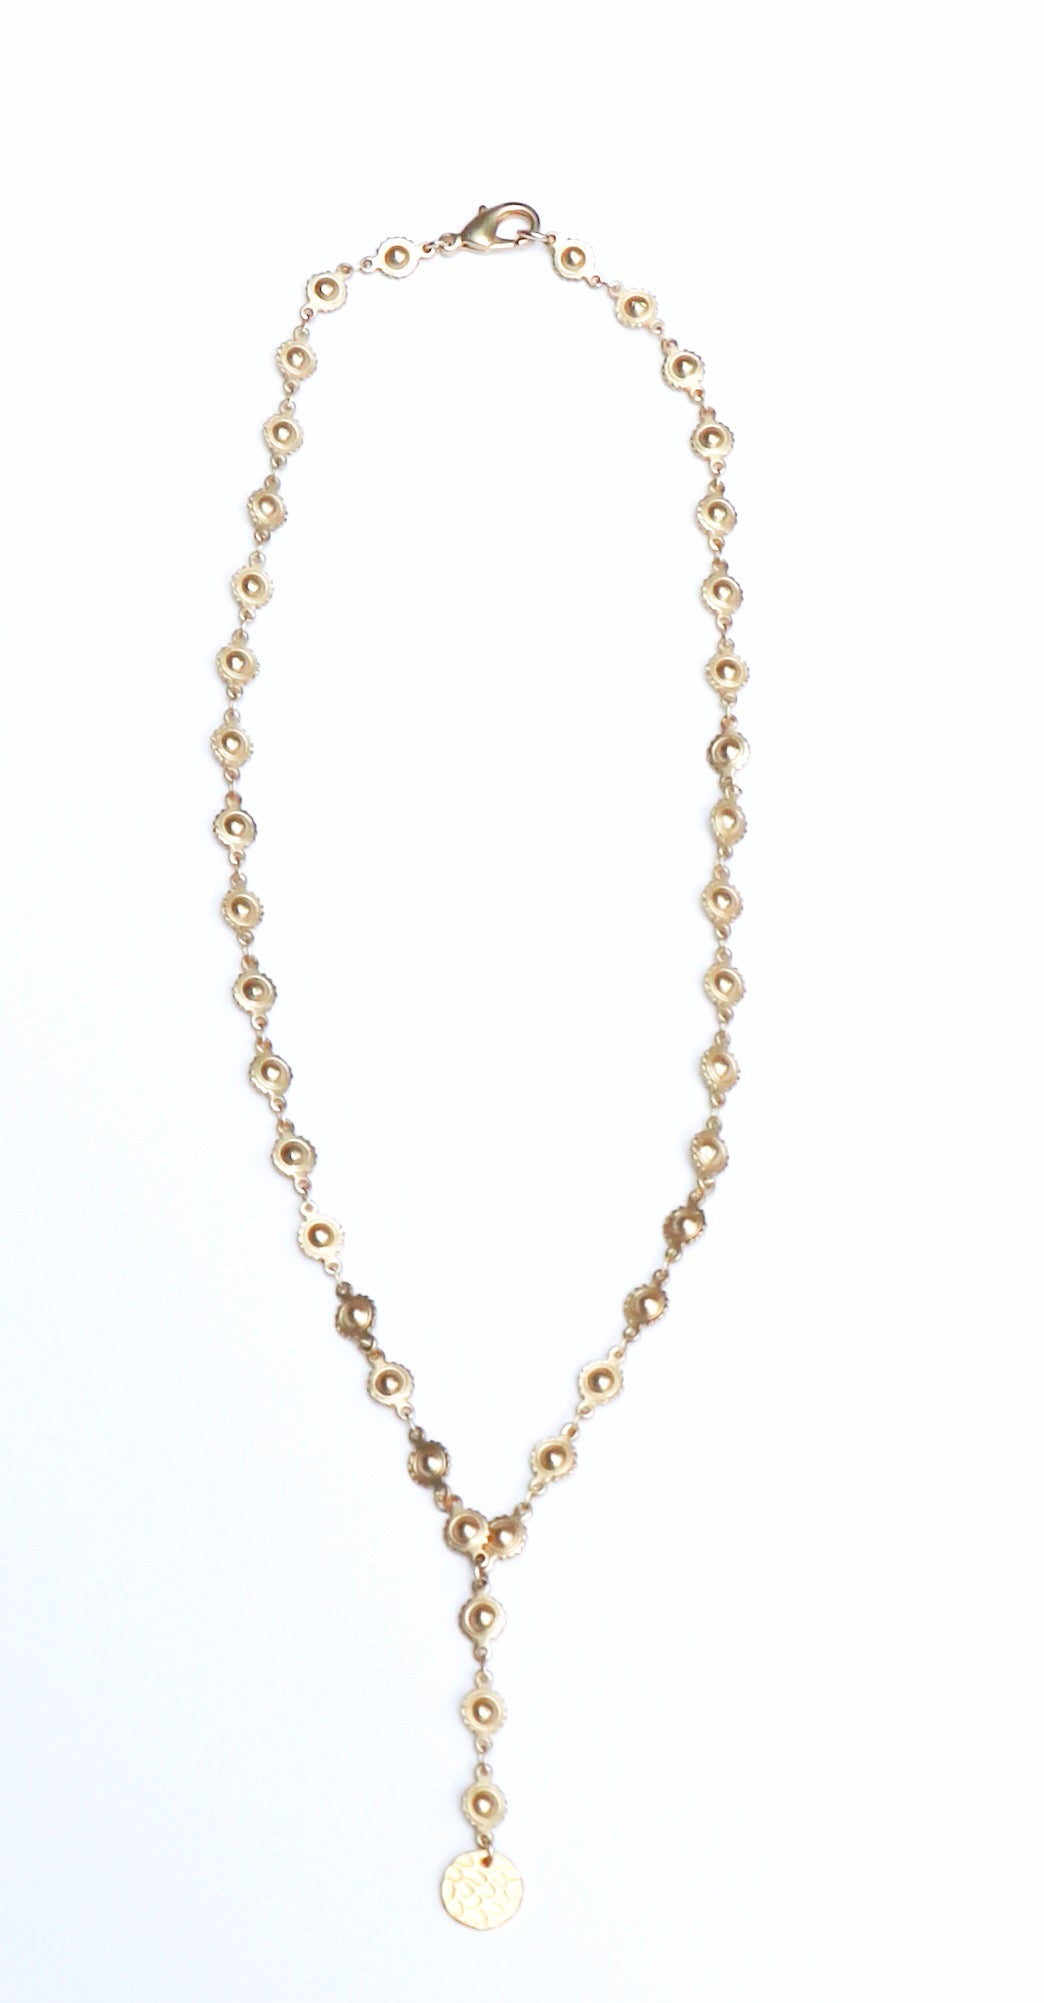 CATHERINE DROP NECKLACE - GOLD